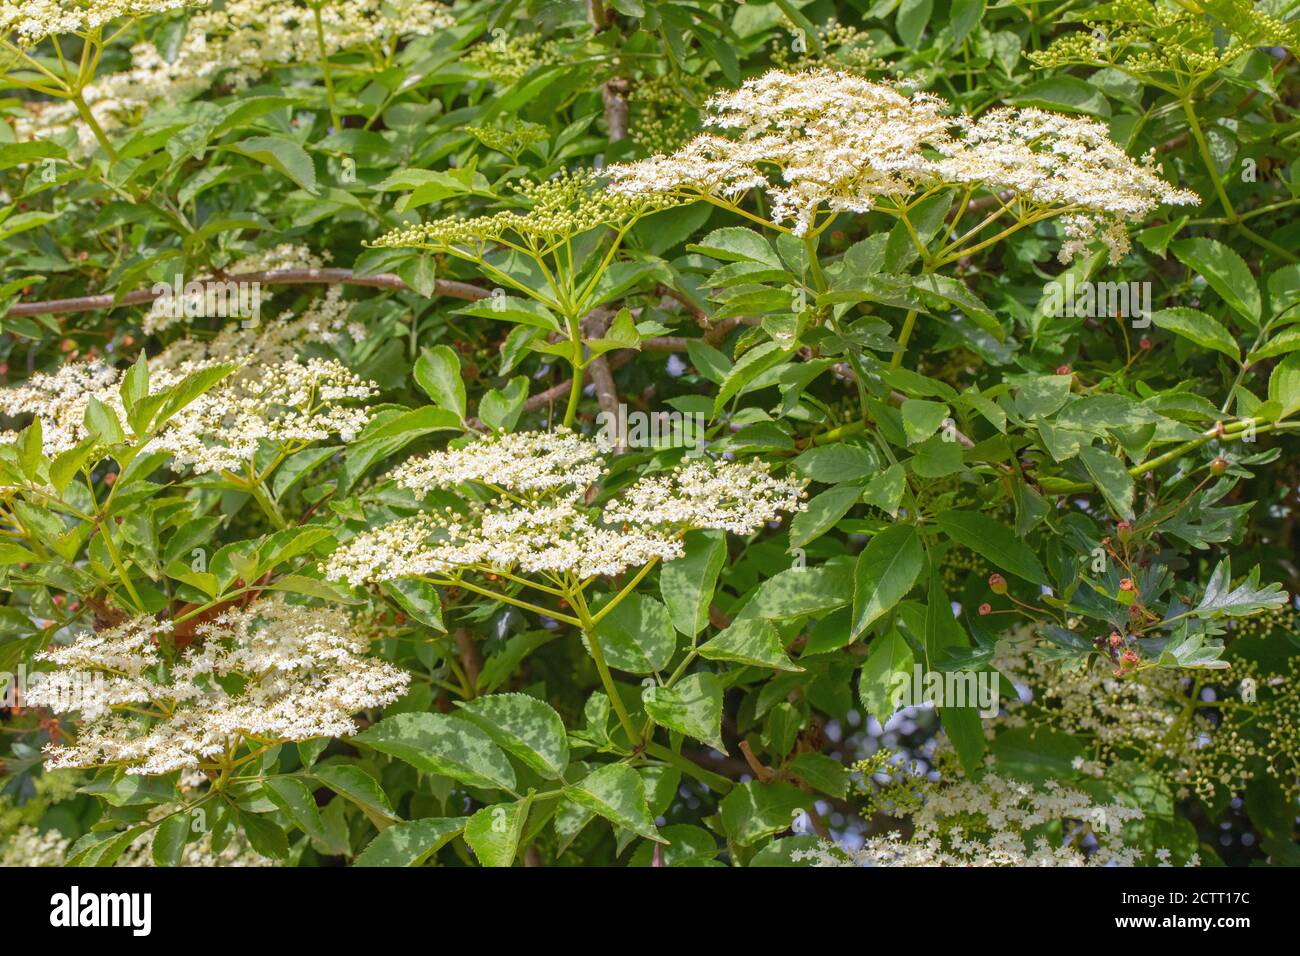 Elder (Sambucus nigra). The numerous white flowers form a flat-topped heads, with a heavy sweet scent. Collectable for wine, or flower, drink making. Stock Photo